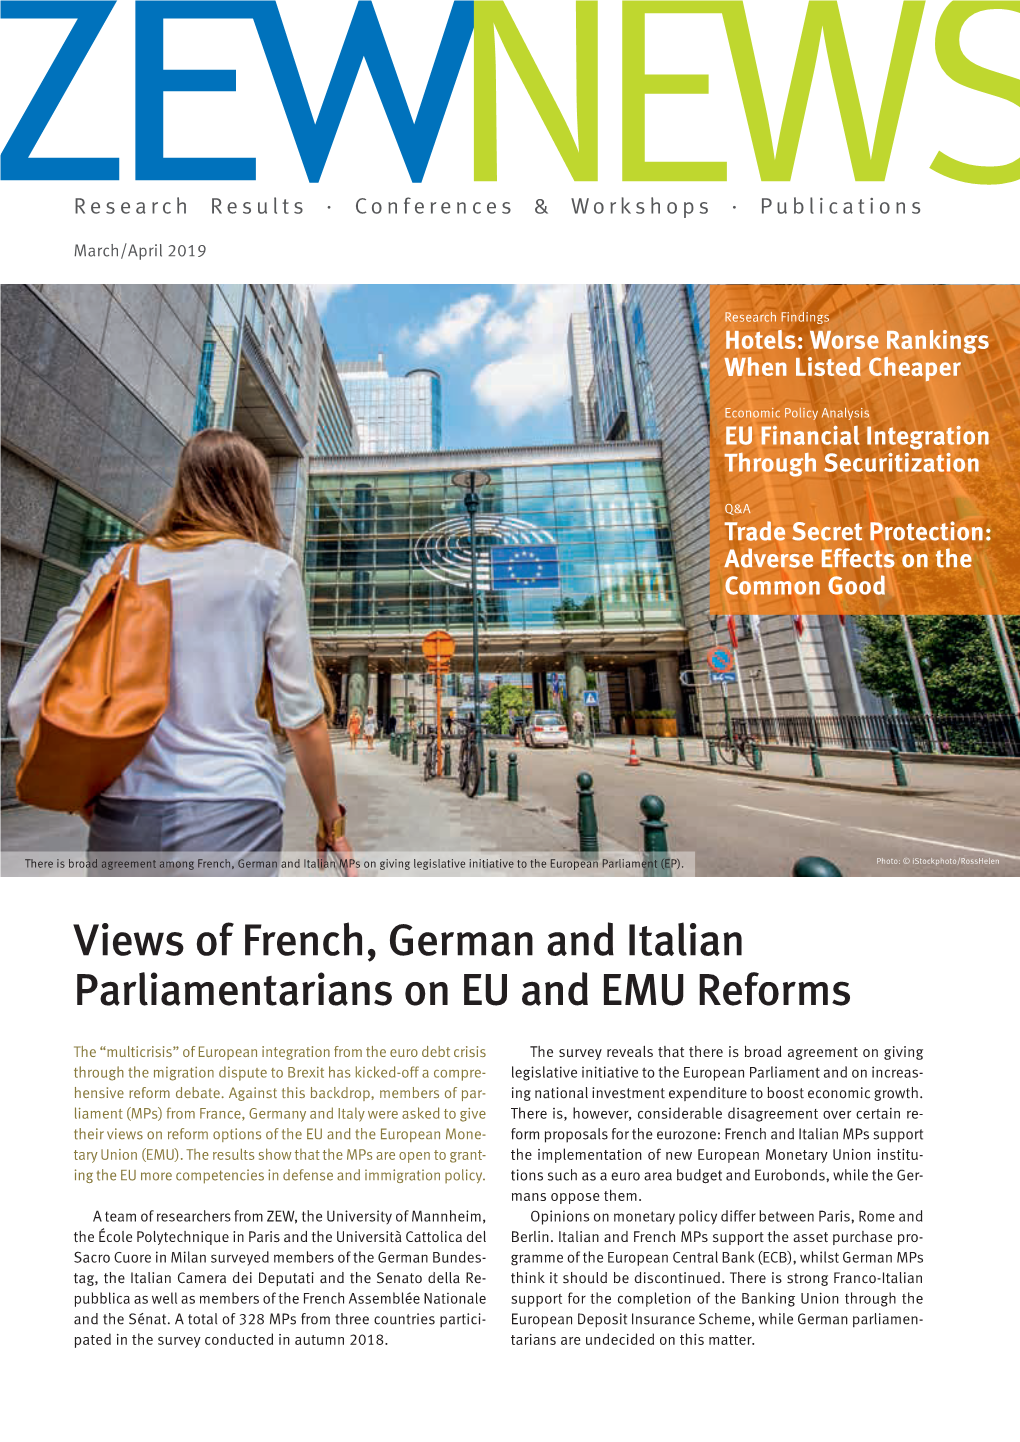 Views of French, German and Italian Parliamentarians on EU and EMU Reforms